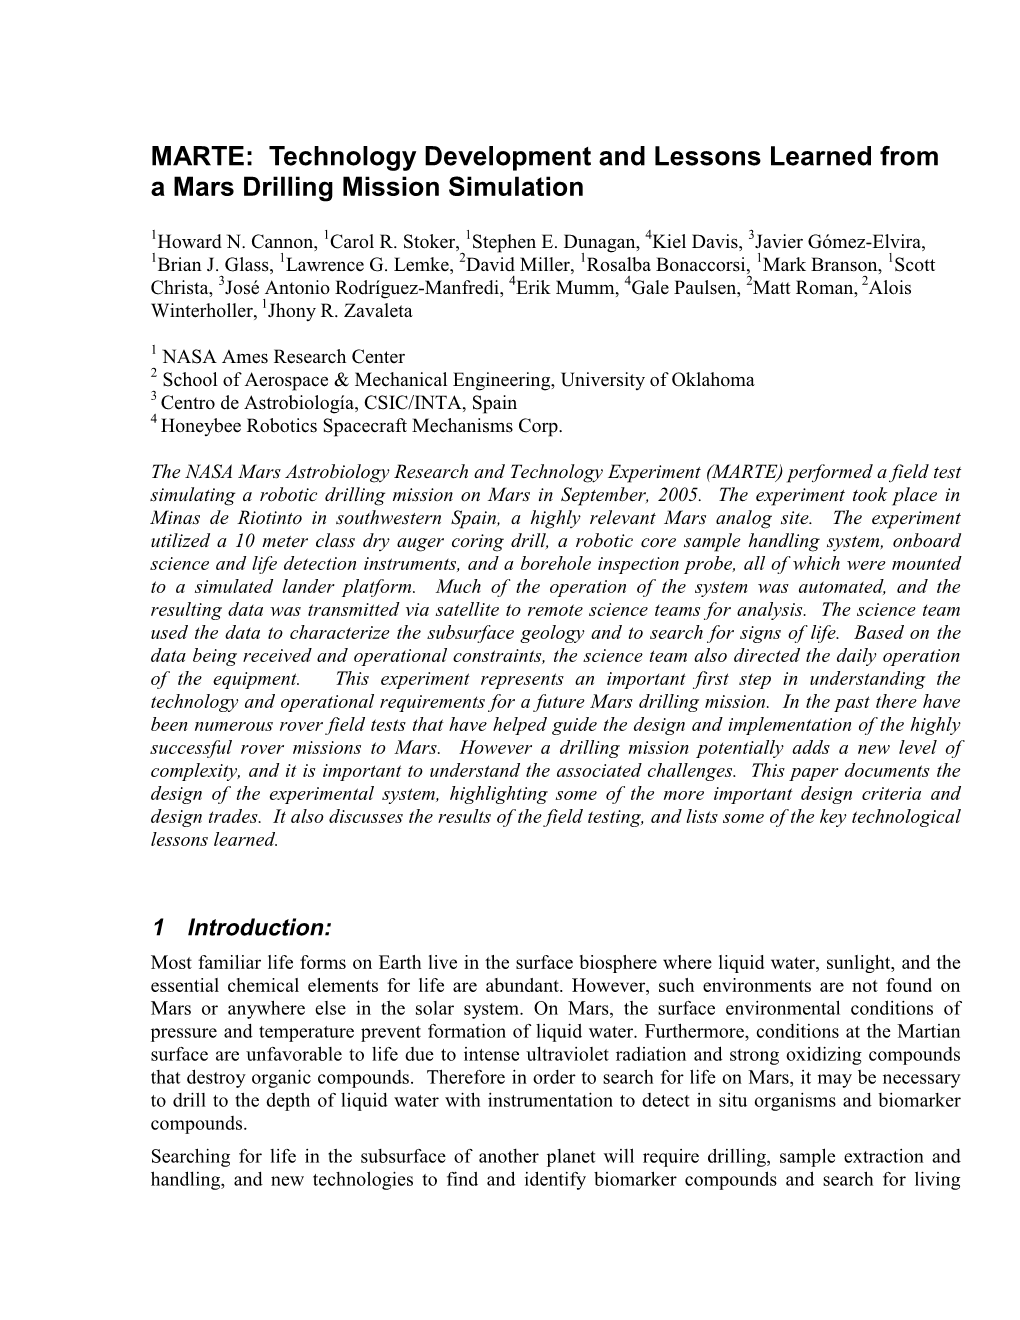 MARTE: Technology Development and Lessons Learned from a Mars Drilling Mission Simulation